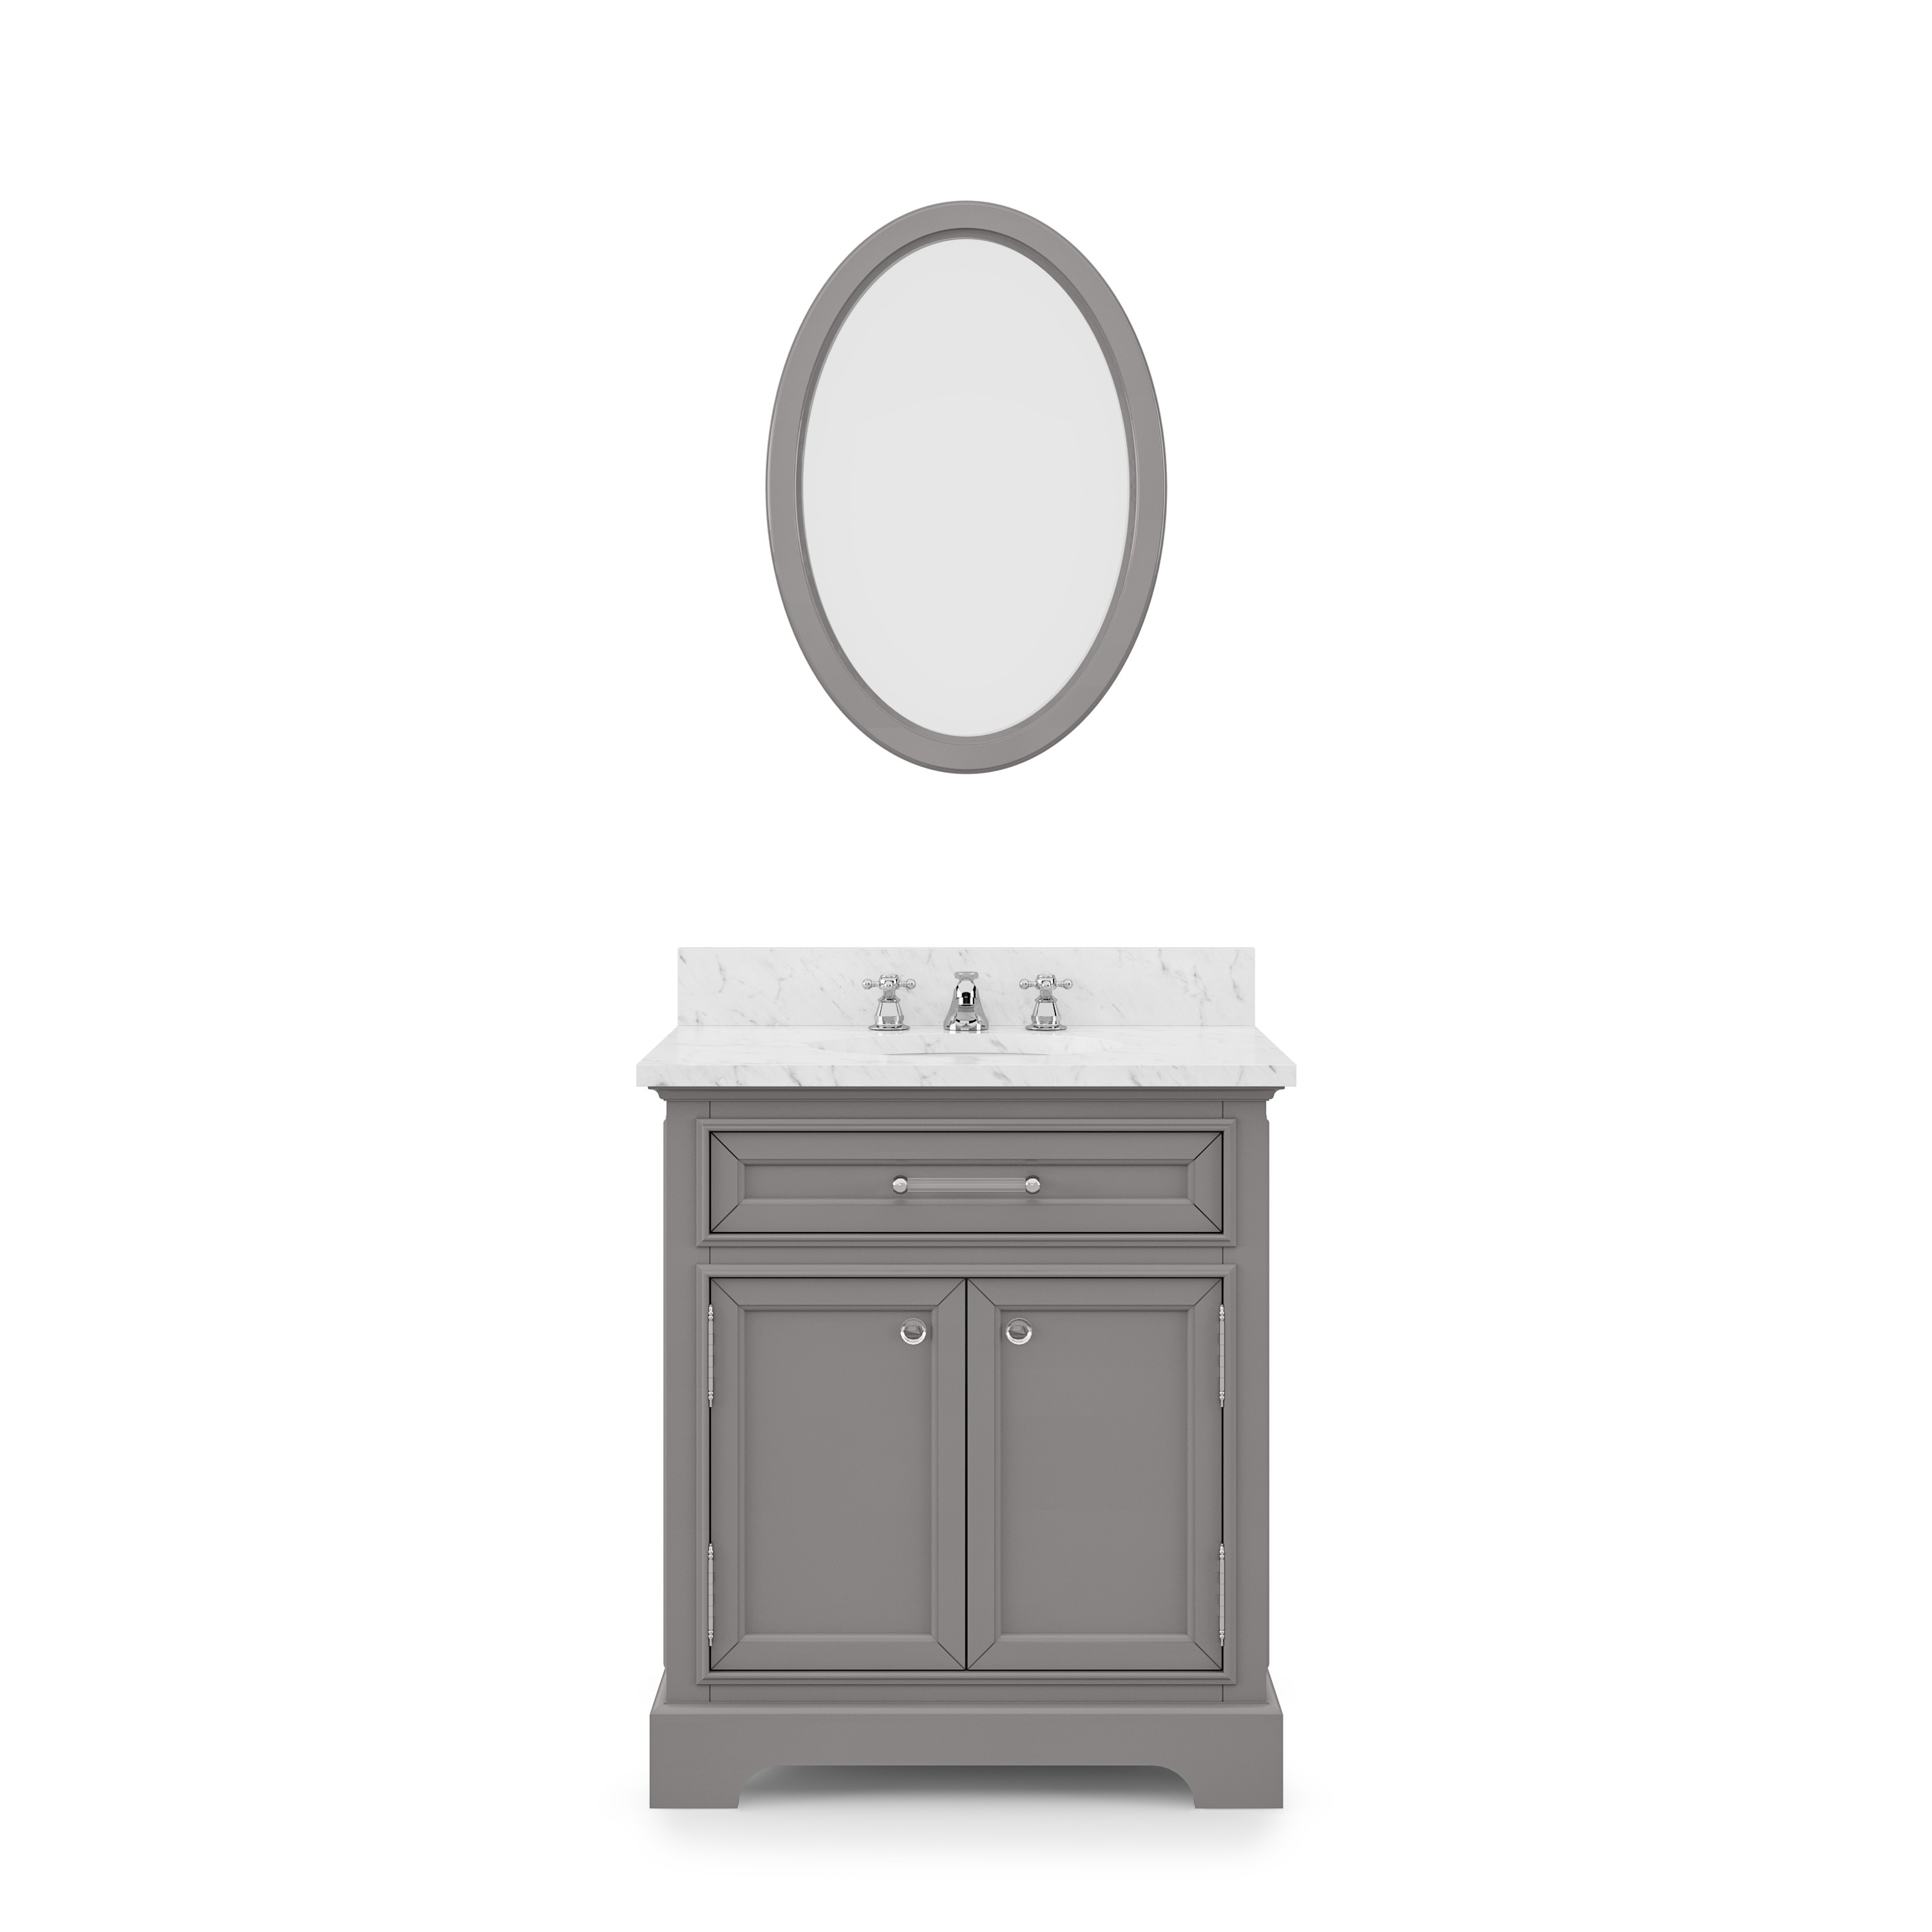 WATER-CREATION DE30CW01CG-O24BX0901 DERBY 30 INCH CASHMERE GREY SINGLE SINK BATHROOM VANITY WITH MATCHING FRAMED MIRROR AND FAUCET